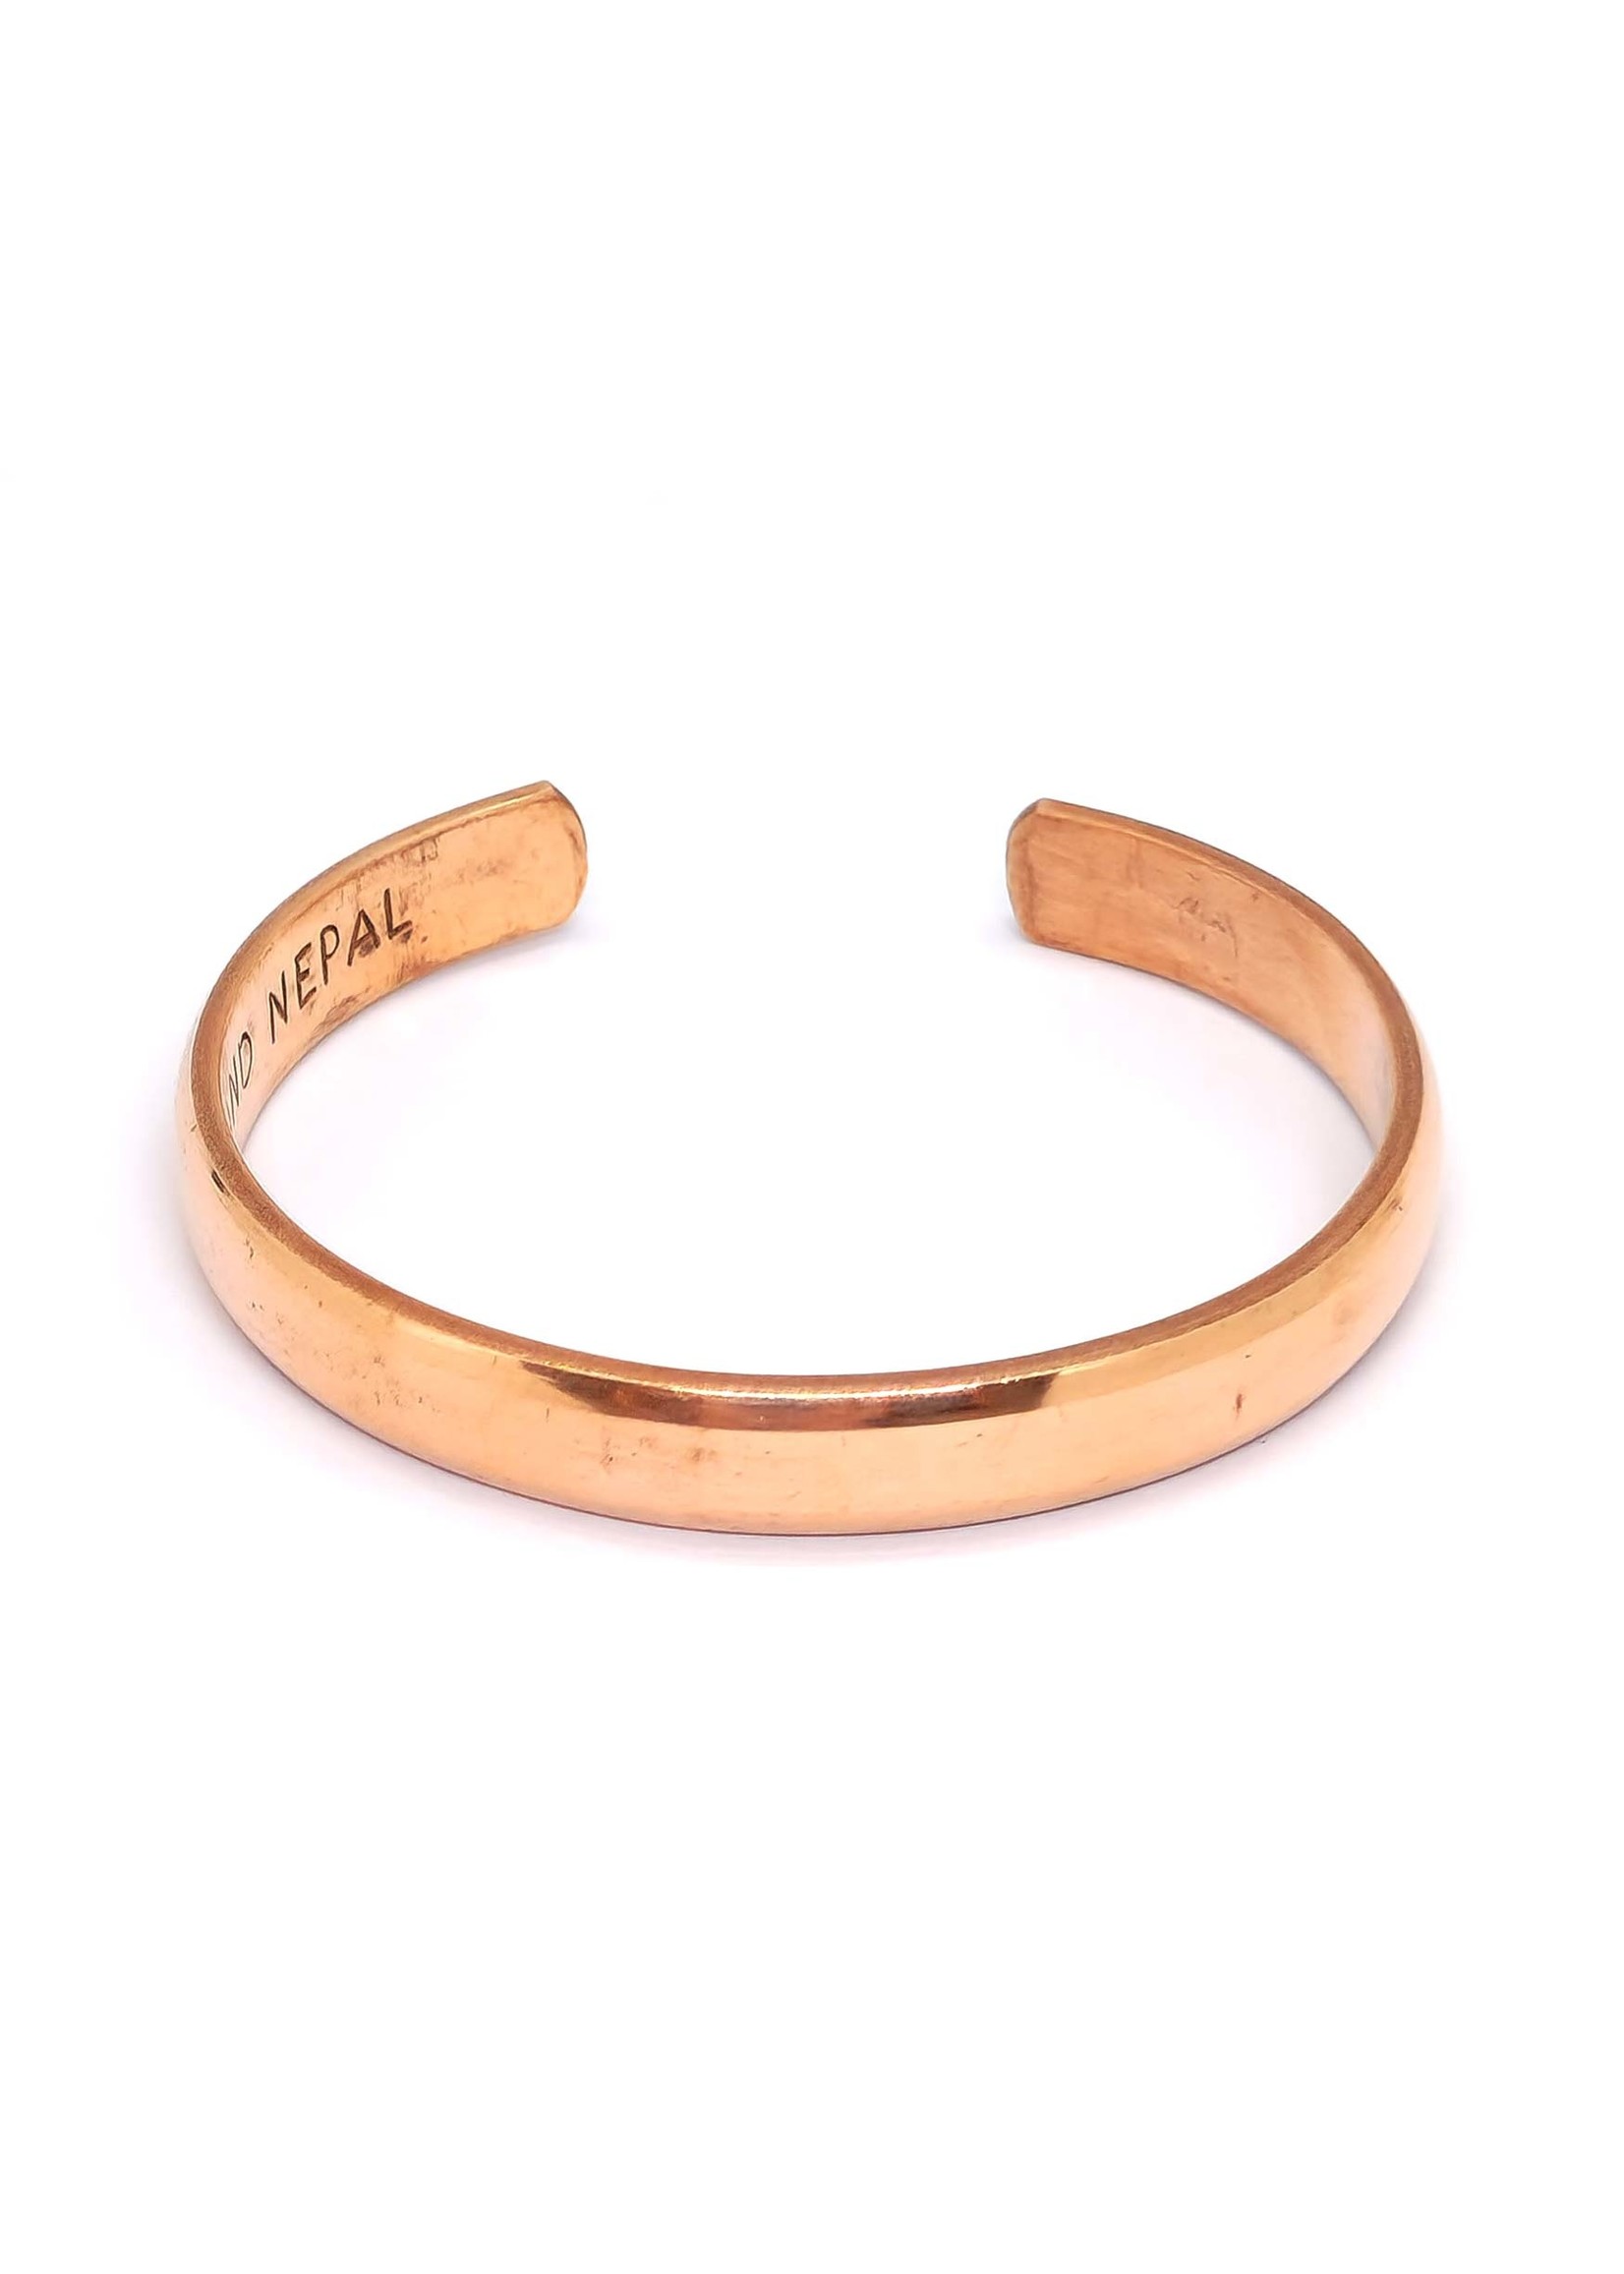 Copper Bangle, Adjustable Size With Open Back